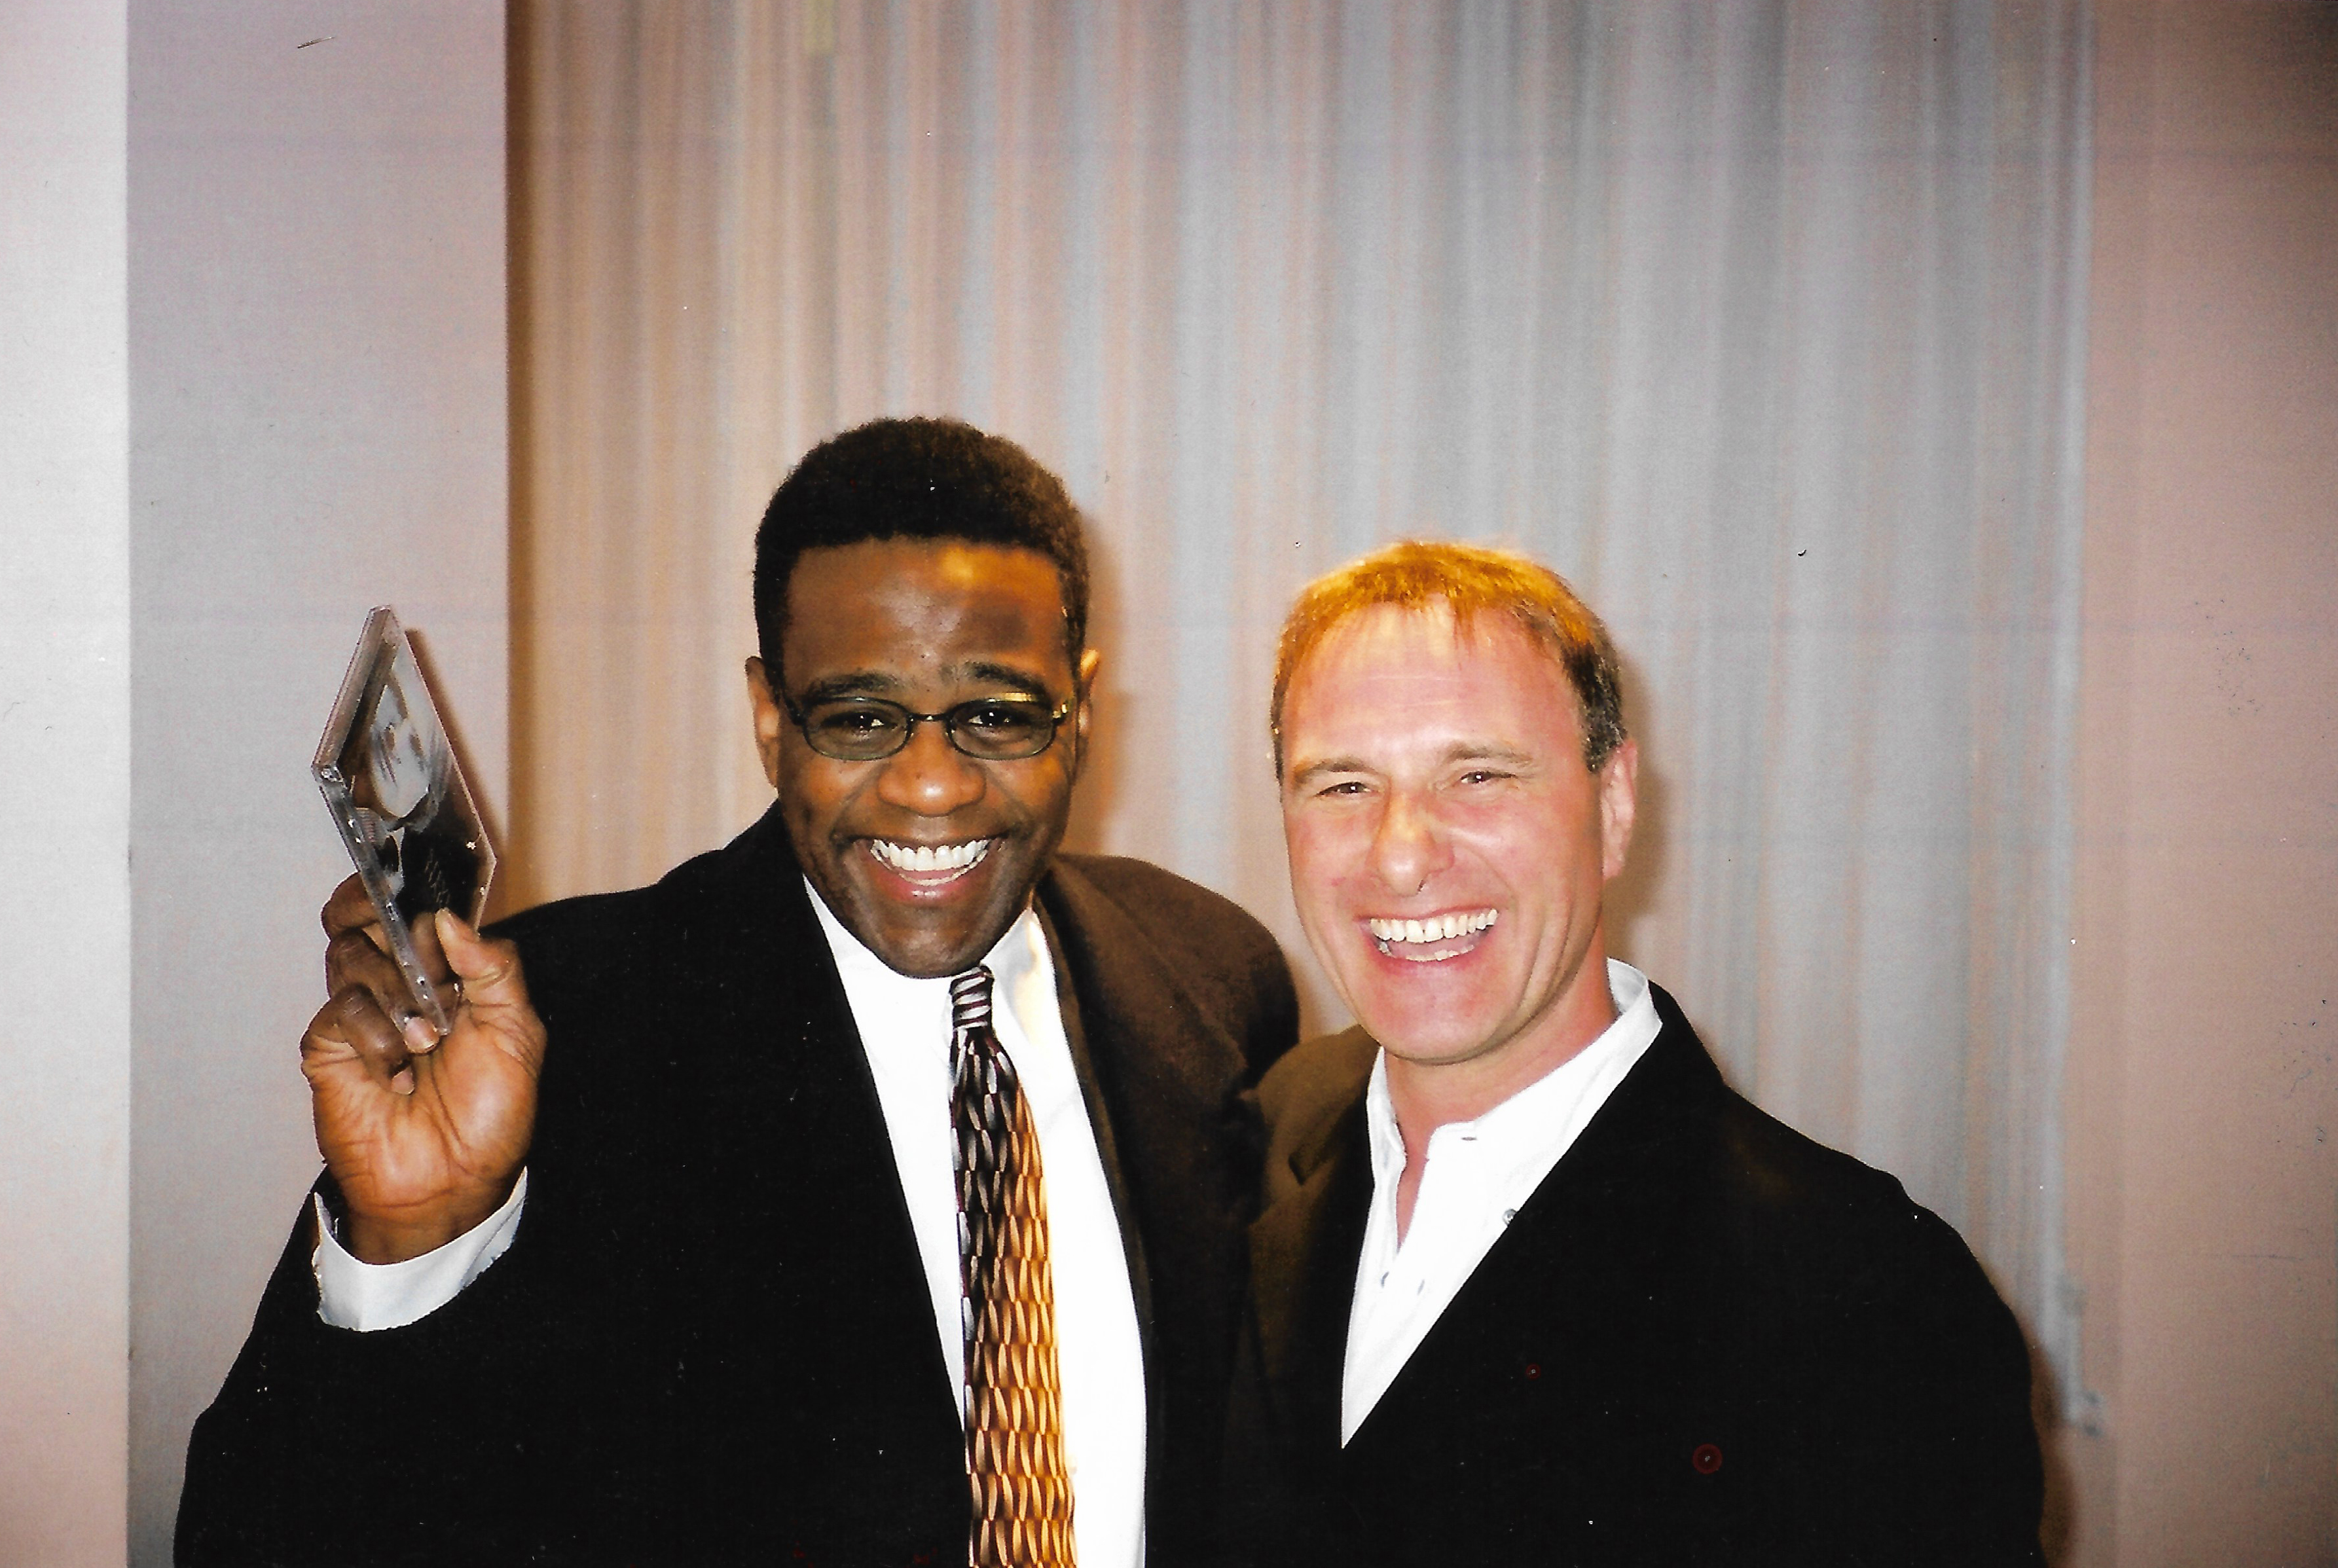 Steve with Al Green